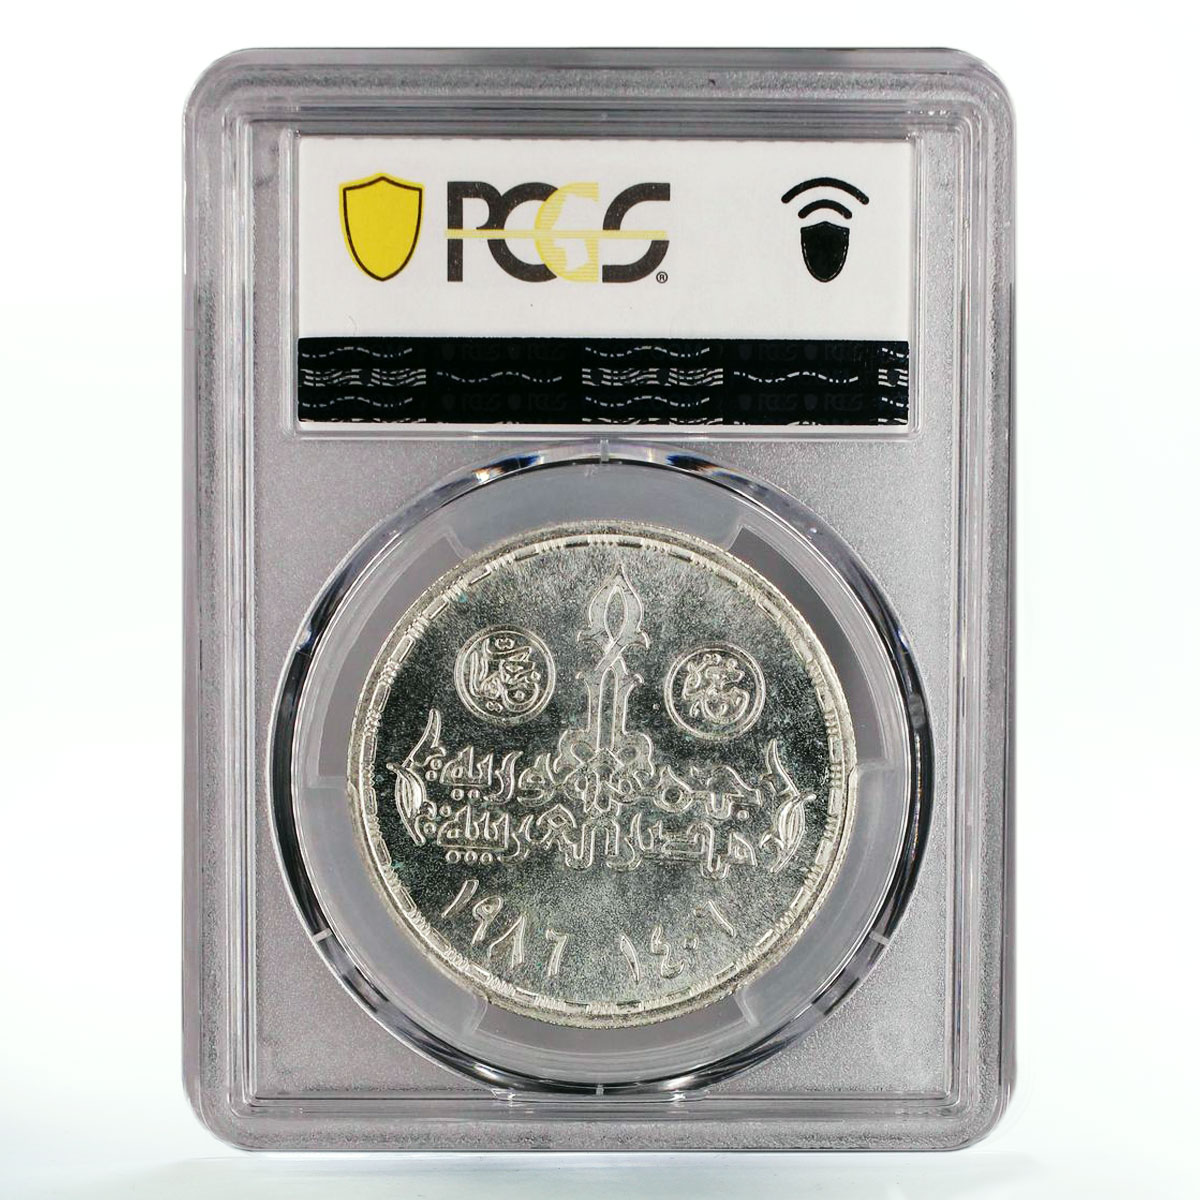 Egypt 5 pounds 30 Years Atomic Energy Organization MS65 PCGS silver coin 1986